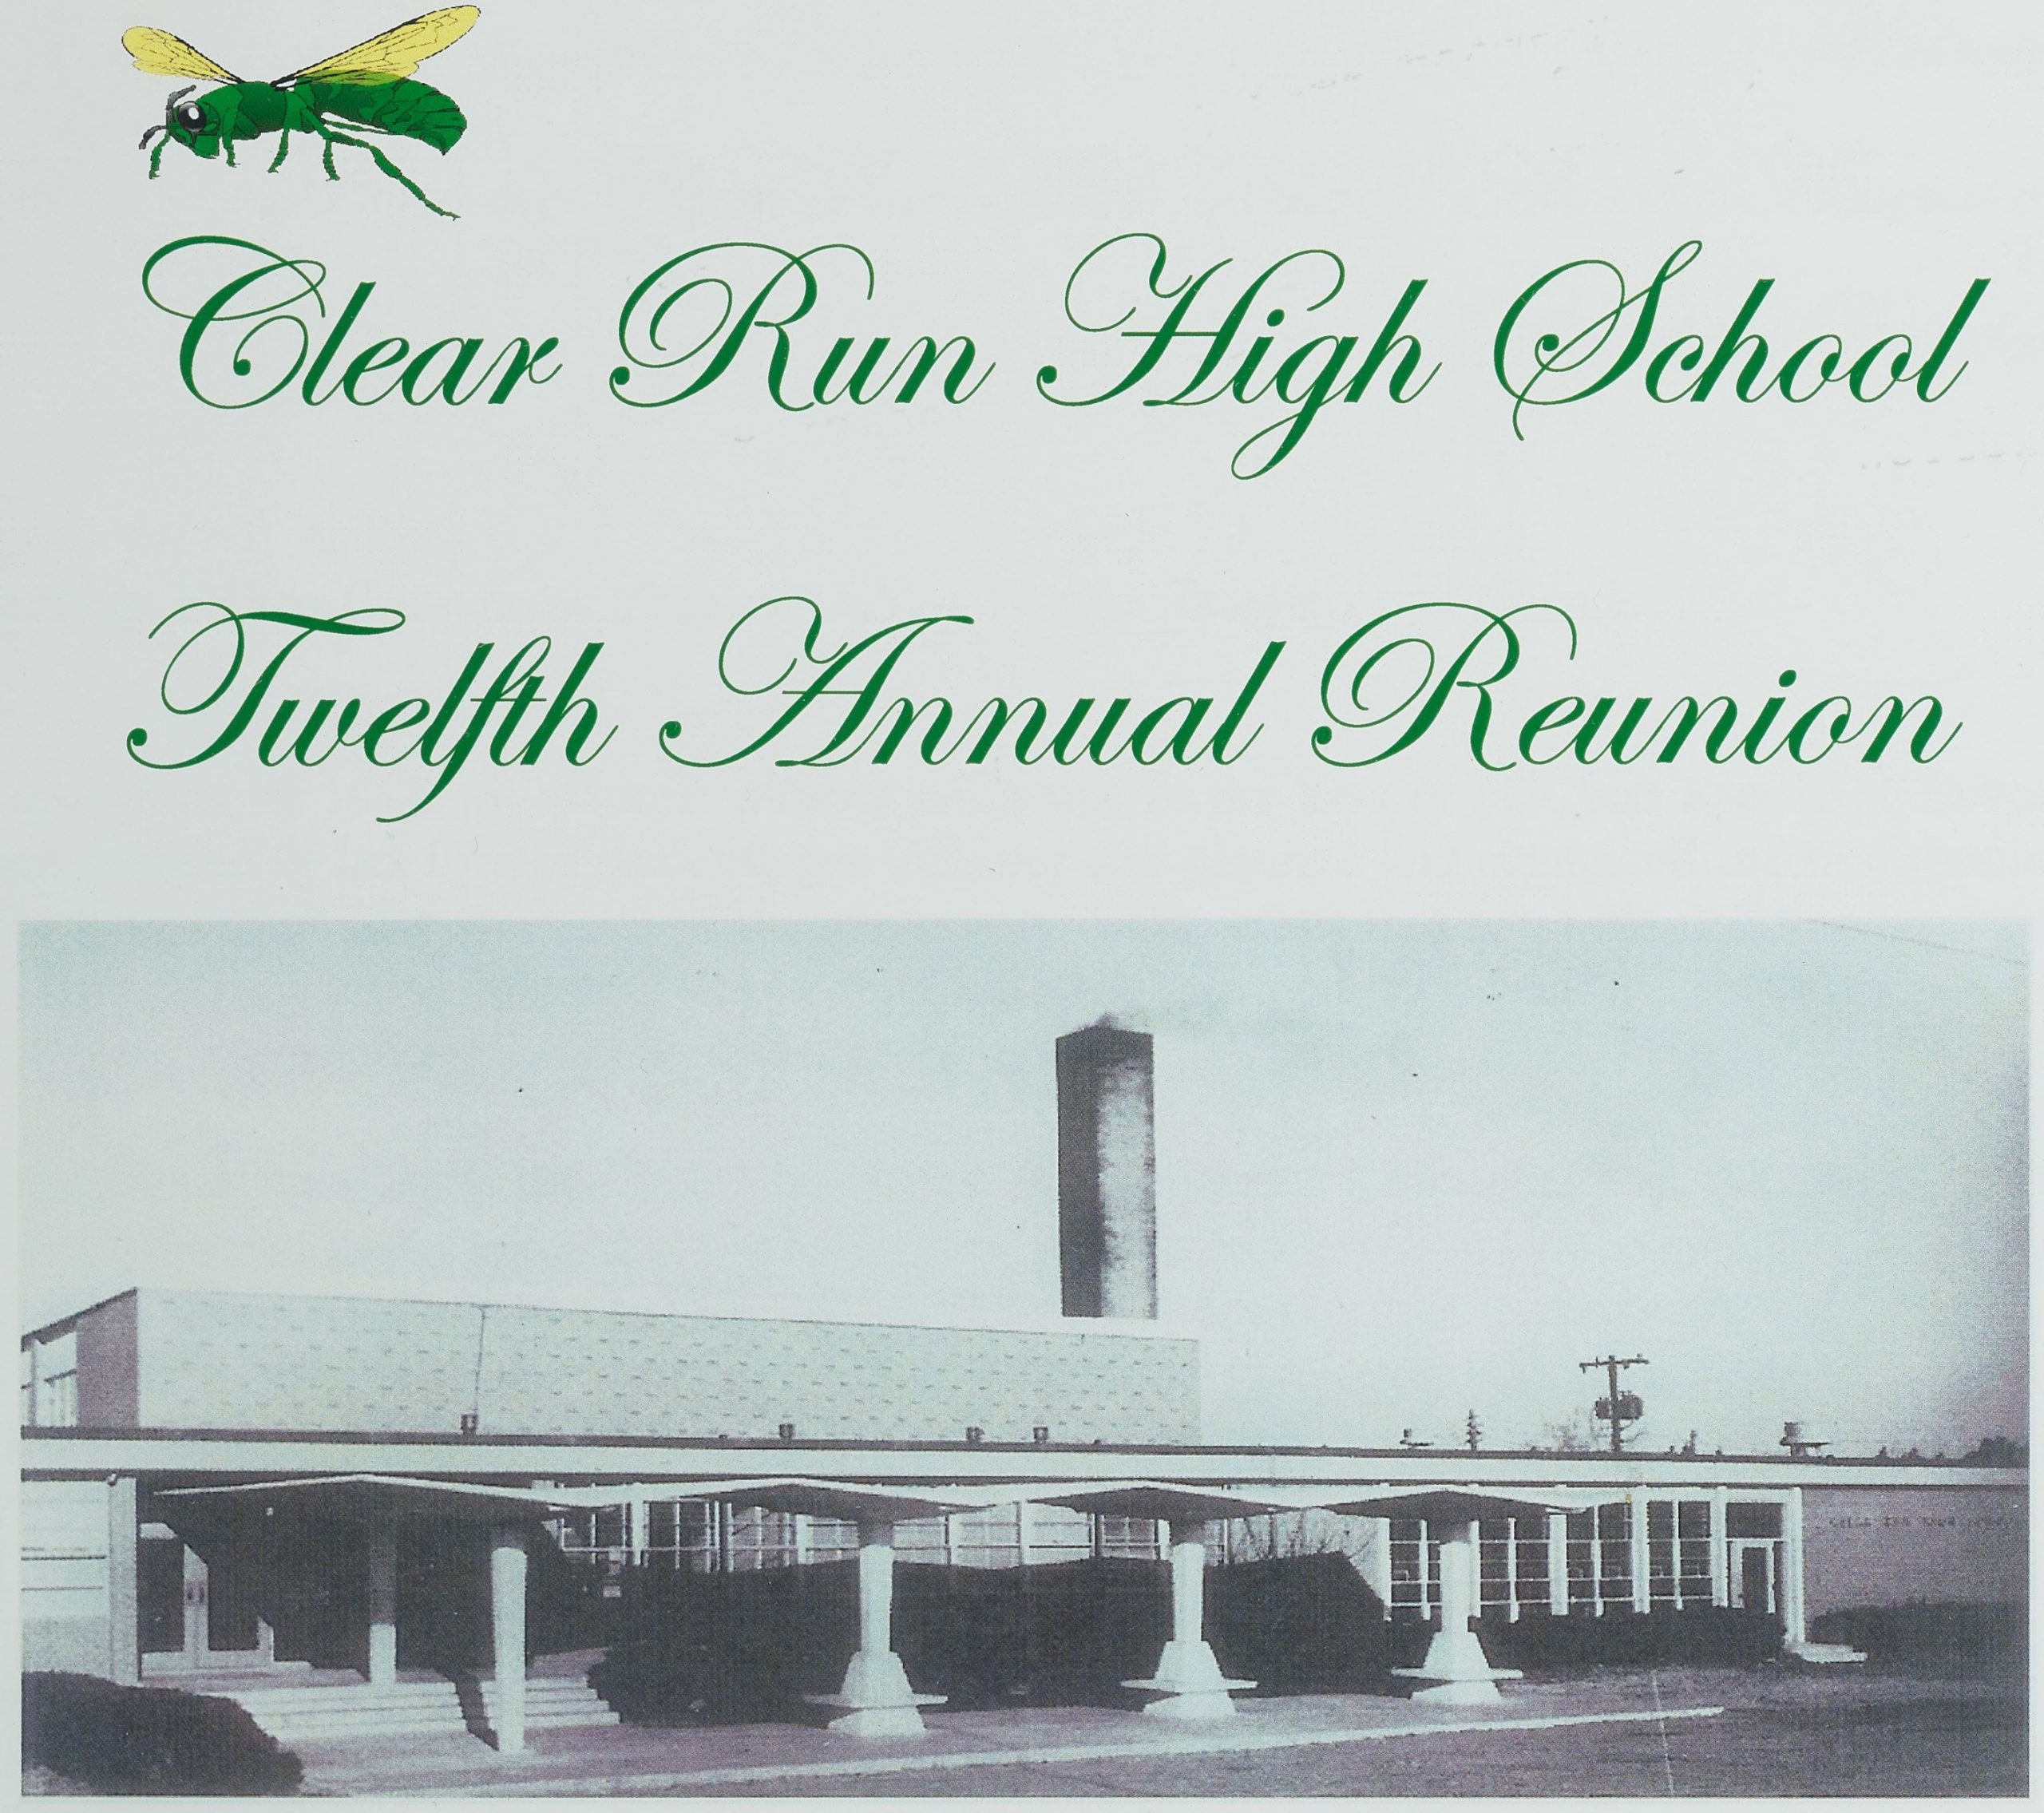 Cover from the 12th annual reunion for Clear Run High School. In elegant script, the page reads "Clear Run High School Twelfth Annual Reunion." Below the script is an image of the high school. In the top left corner there is an image of the school mascot--a green hornet with yellow wings.